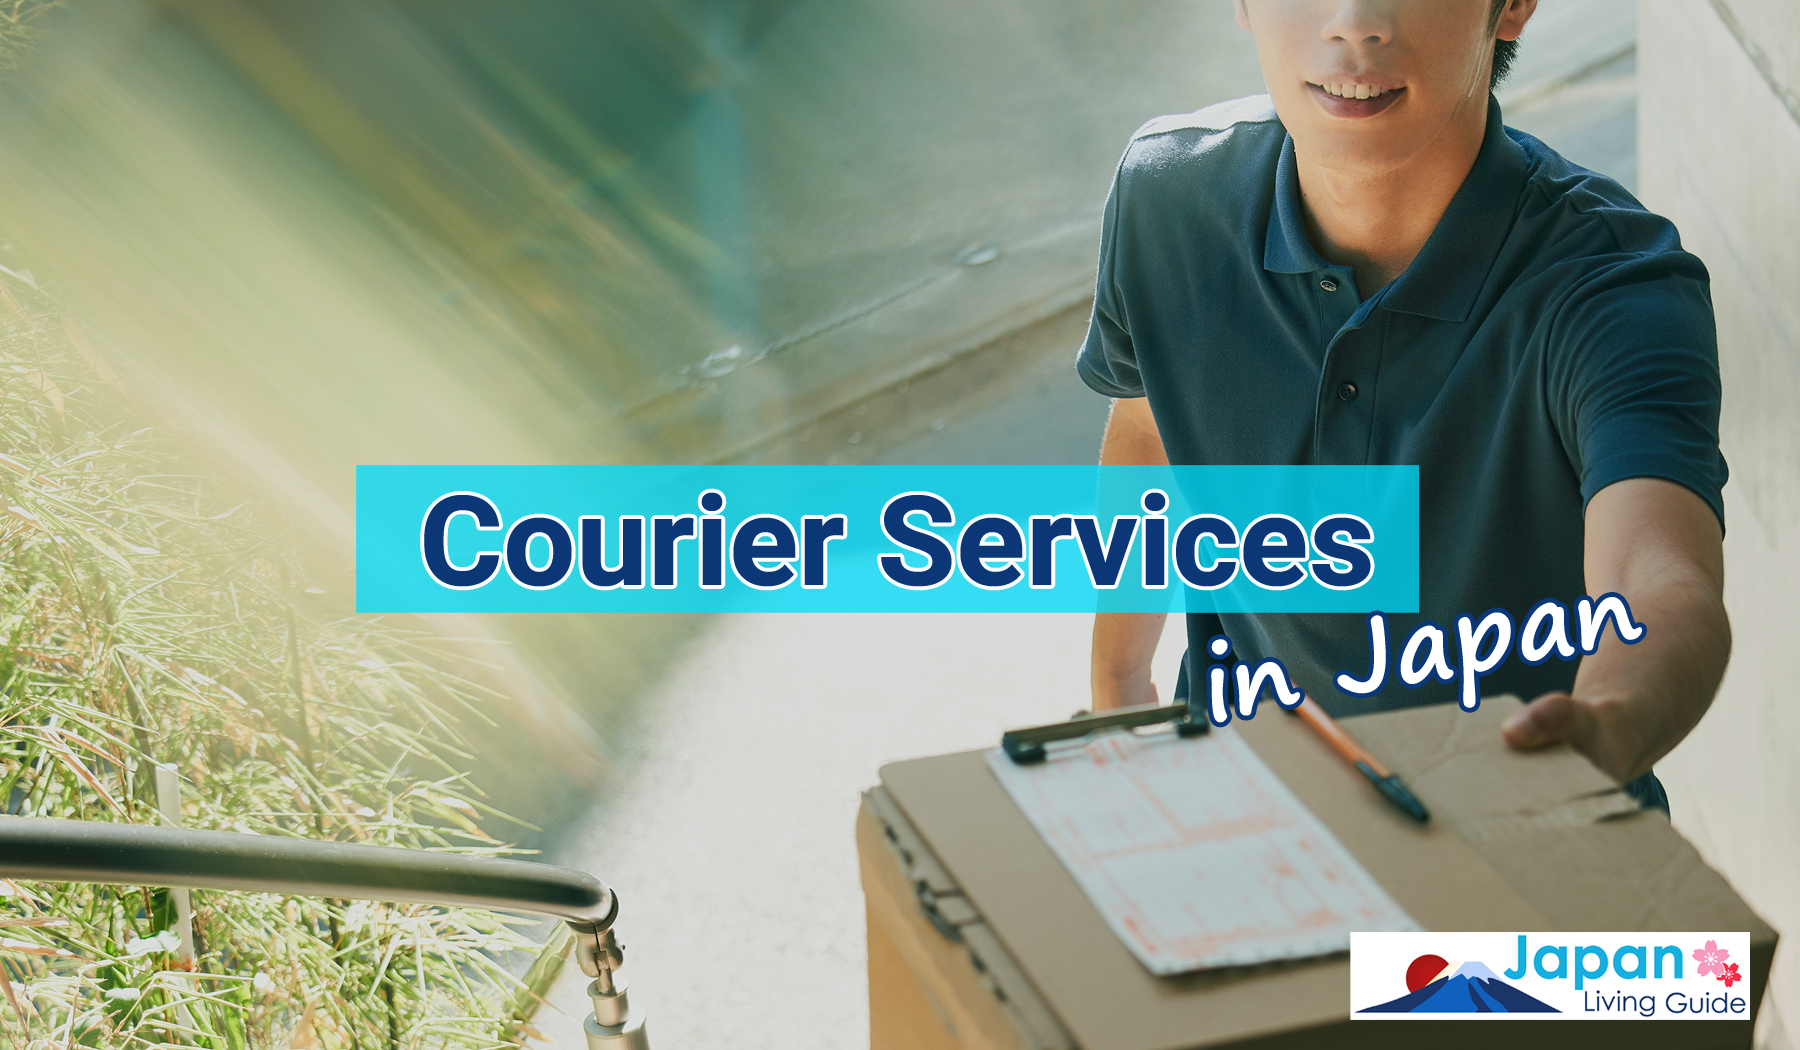 Japan Courier Services Combine Convenience, Efficiency and Innovation -  JapanLivingGuide.net - Living Guide in Japan